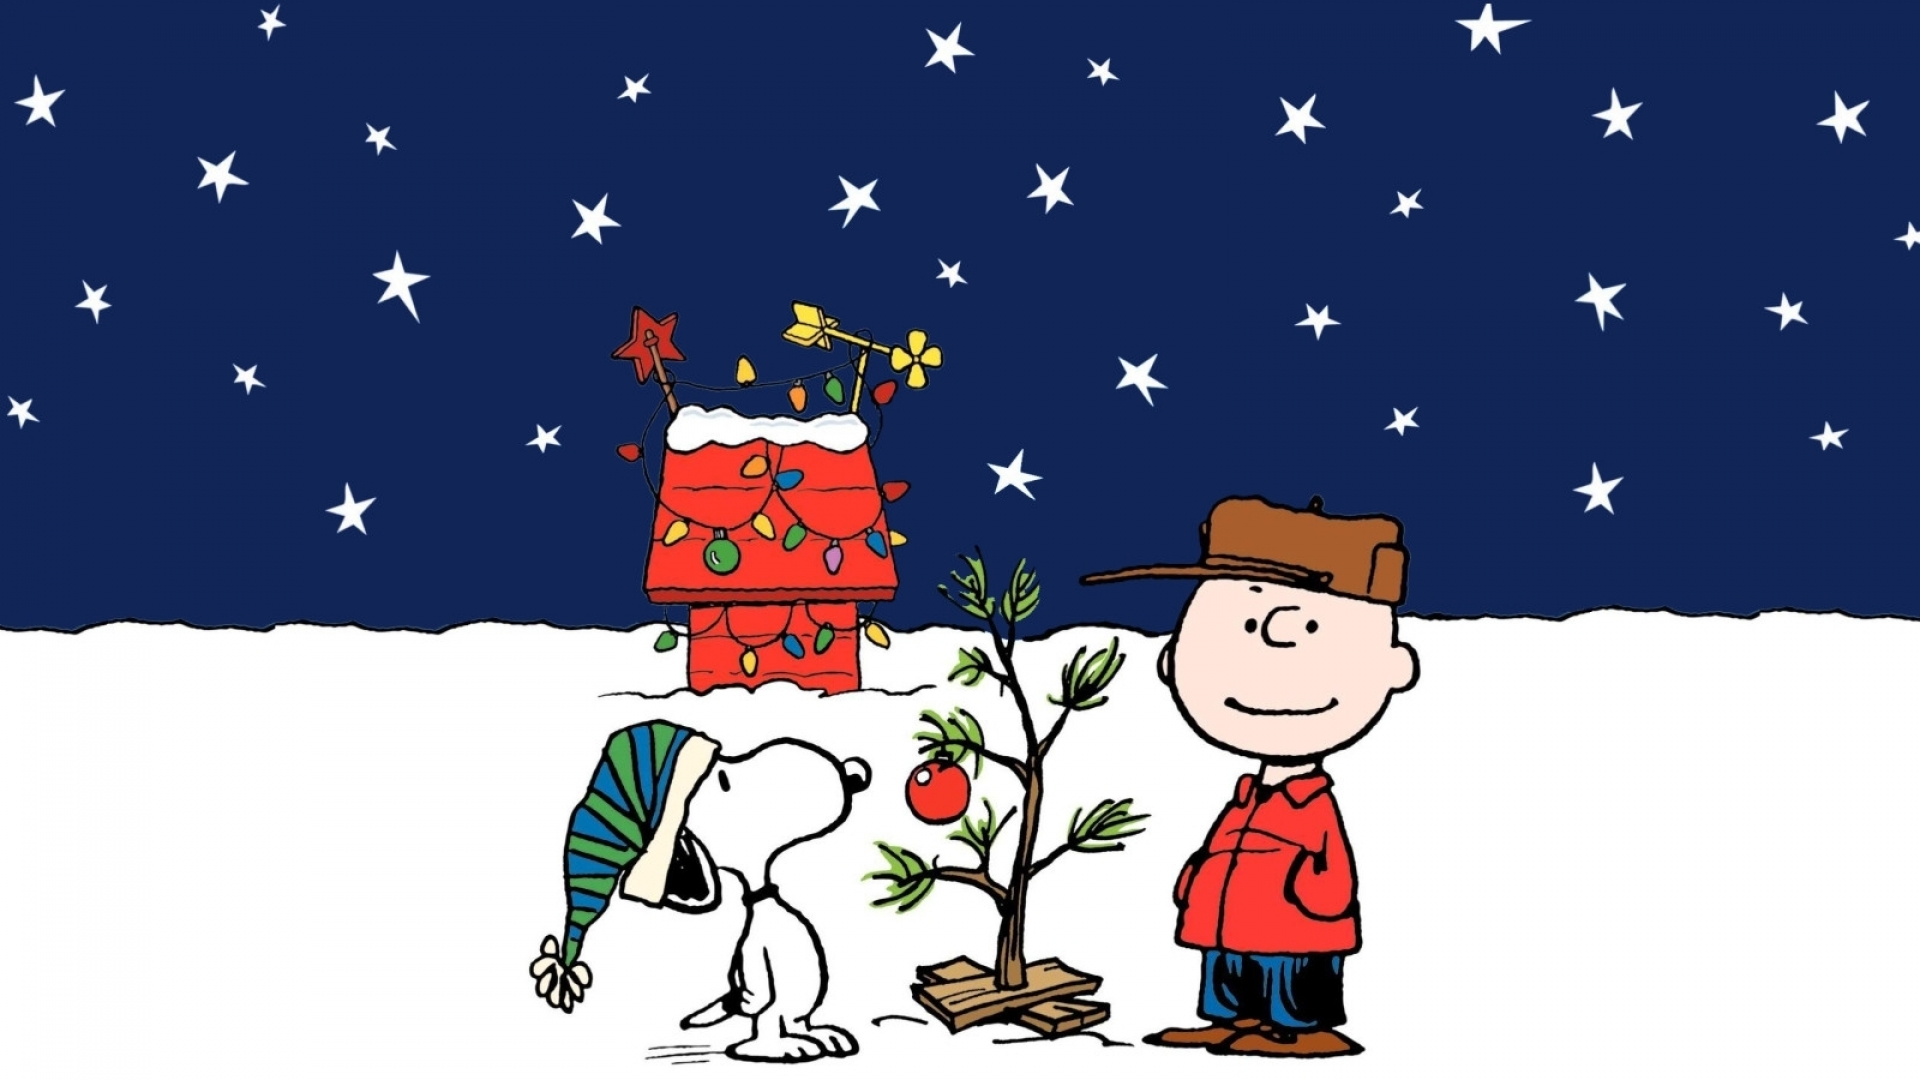 CHARLIE BROWN peanuts comics snoopy christmas gg wallpaper background